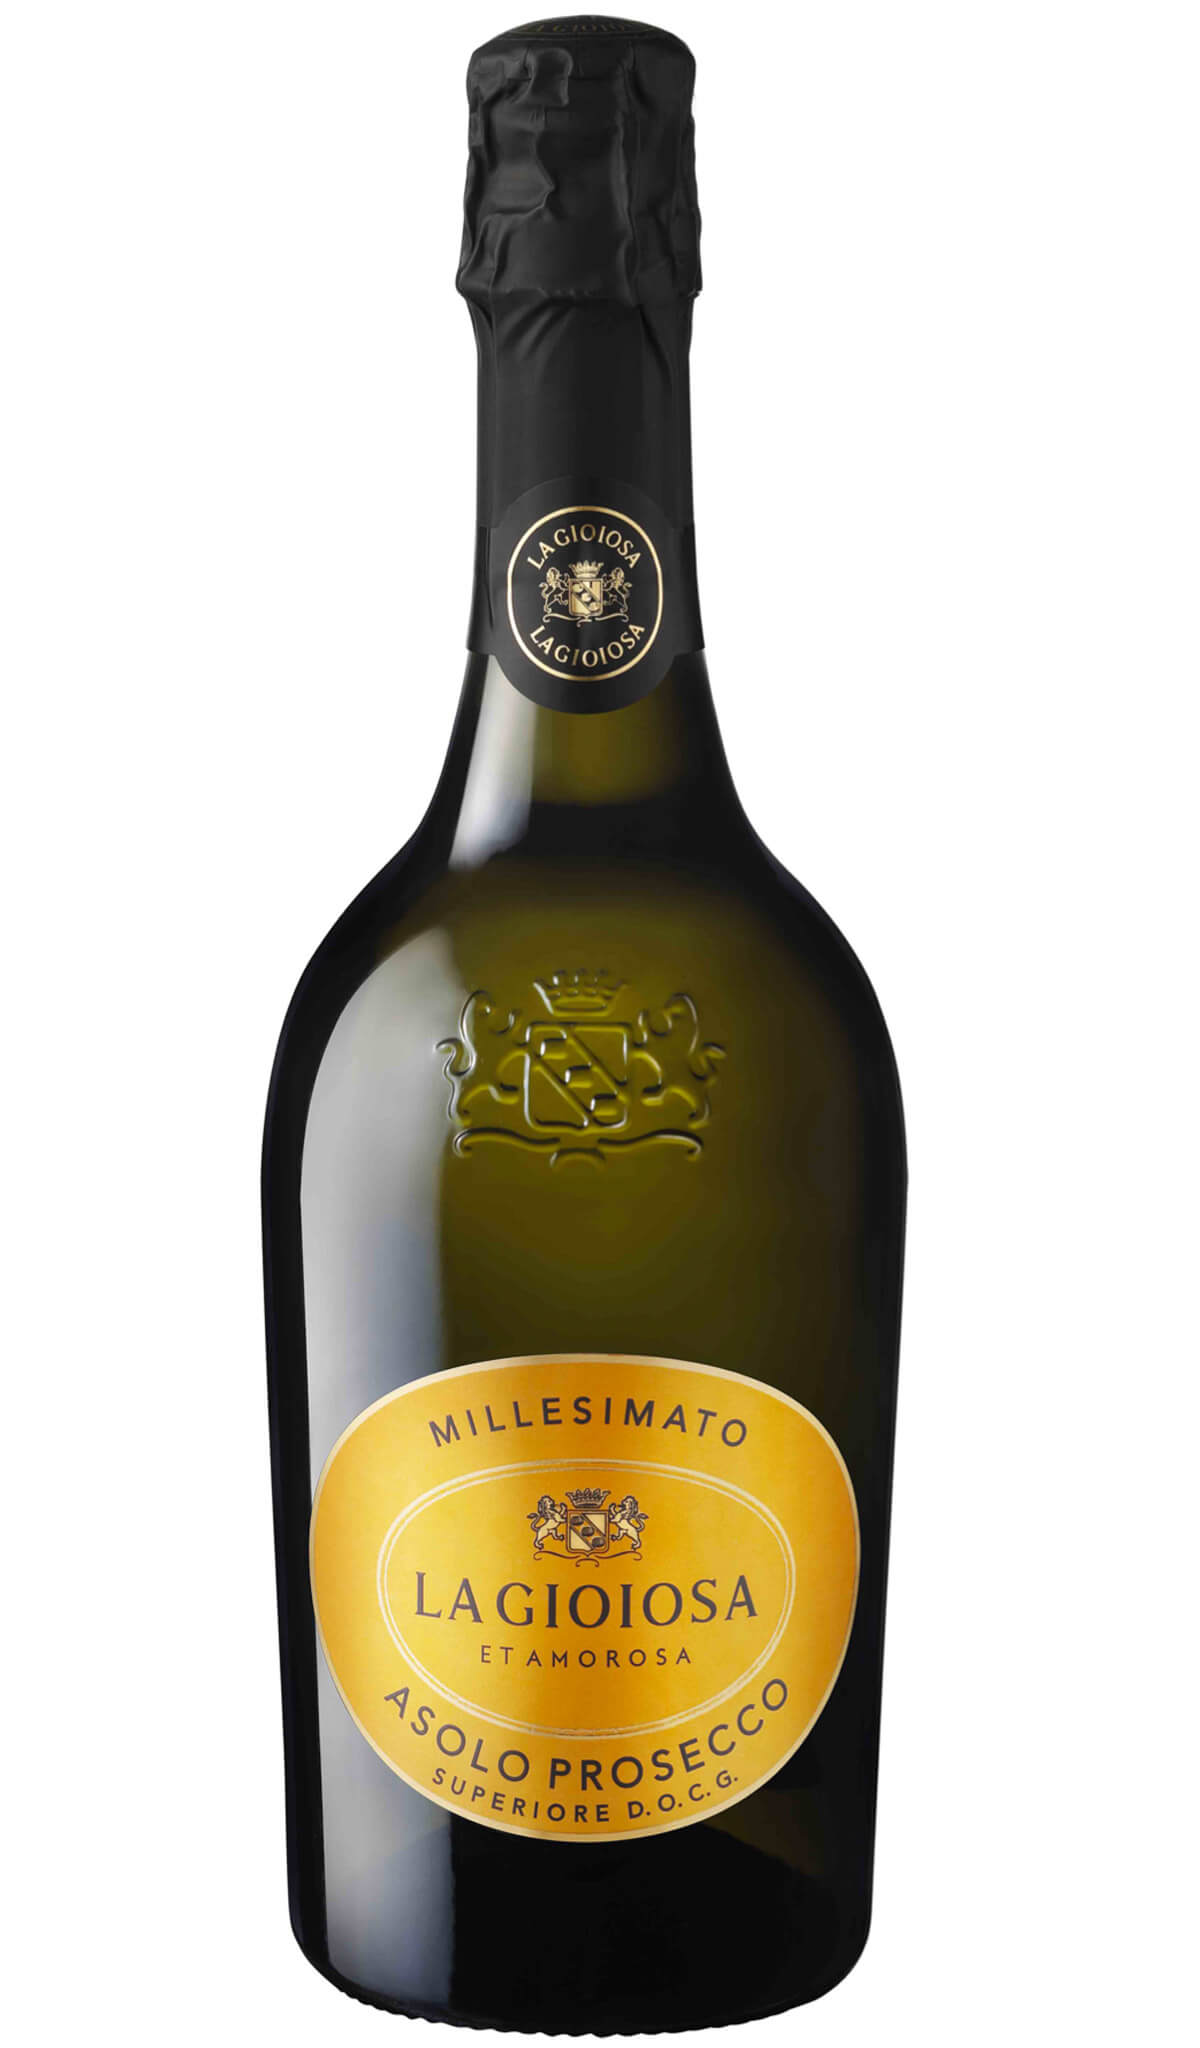 Find out more, explore the range and purchase La Gioiosa Millesimato Asolo Prosecco NV DOCG 750mL available online at Wine Sellers Direct - Australia's independent liquor specialists.